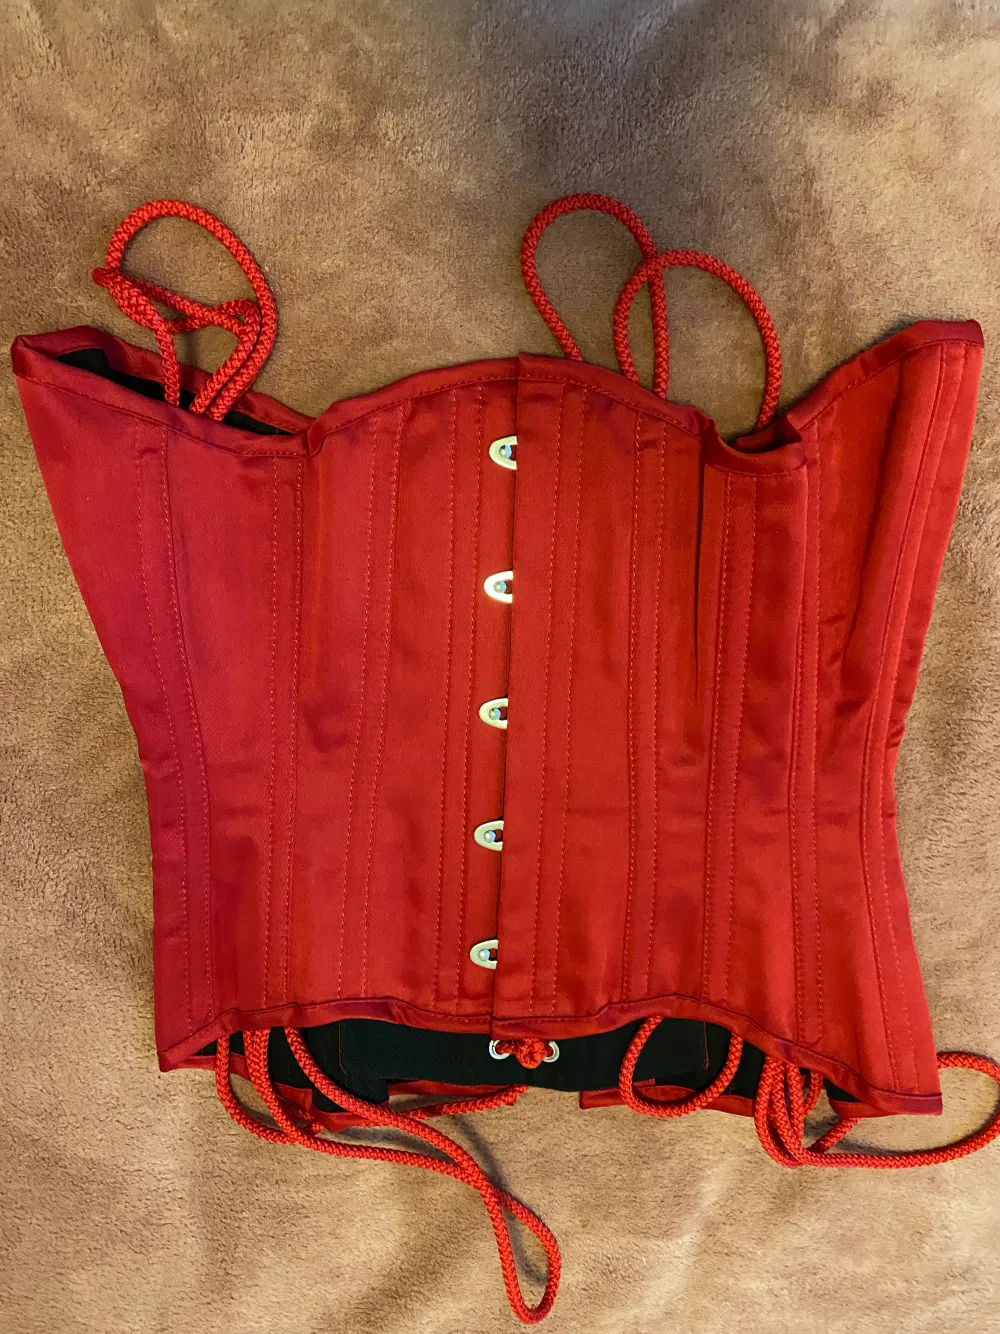 Red plain steel bones waist training tightlacing under corset 24” - M Corset made of red fabric with metal busk clasp and corset stiffened with 20 bones. 16 spiral steel bones and 4 steel flat bones near busk and lacing. Only worn once  . Toppar.